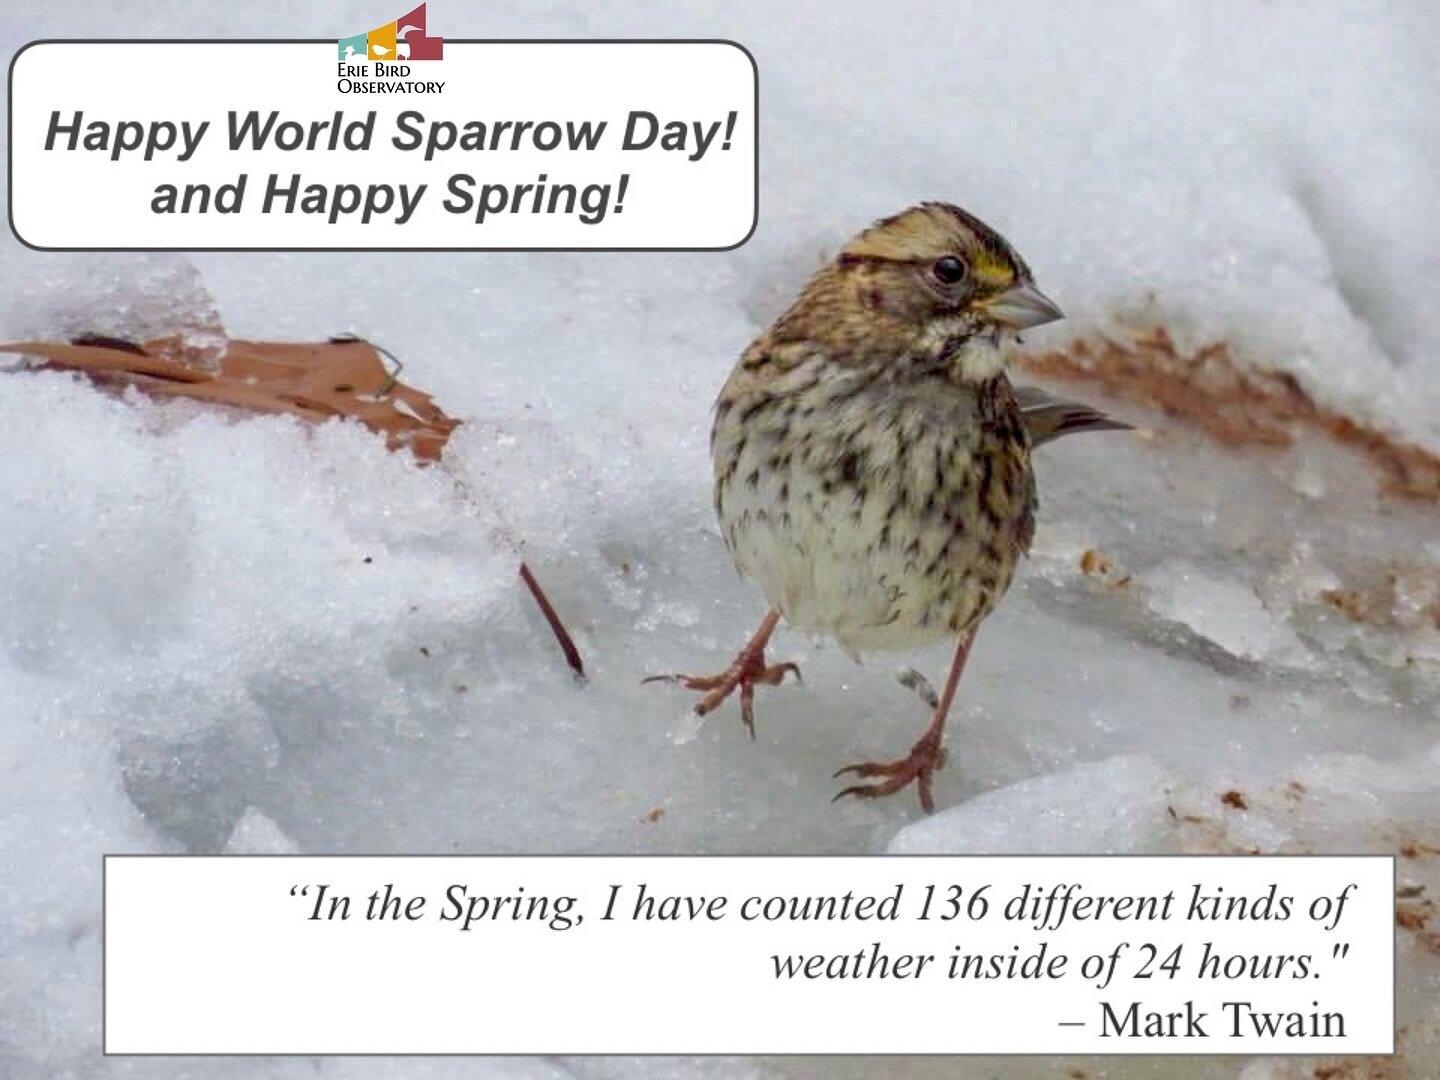 &ldquo;In the Spring, I have counted 136 different kinds of weather inside of 24 hours.&rdquo; &ndash; Mark Twain

Just in case anyone forgot Mark Twain lived on Lake Erie for two years. 😉

Happy #WorldSparrowDay and Happy Spring! 

________________